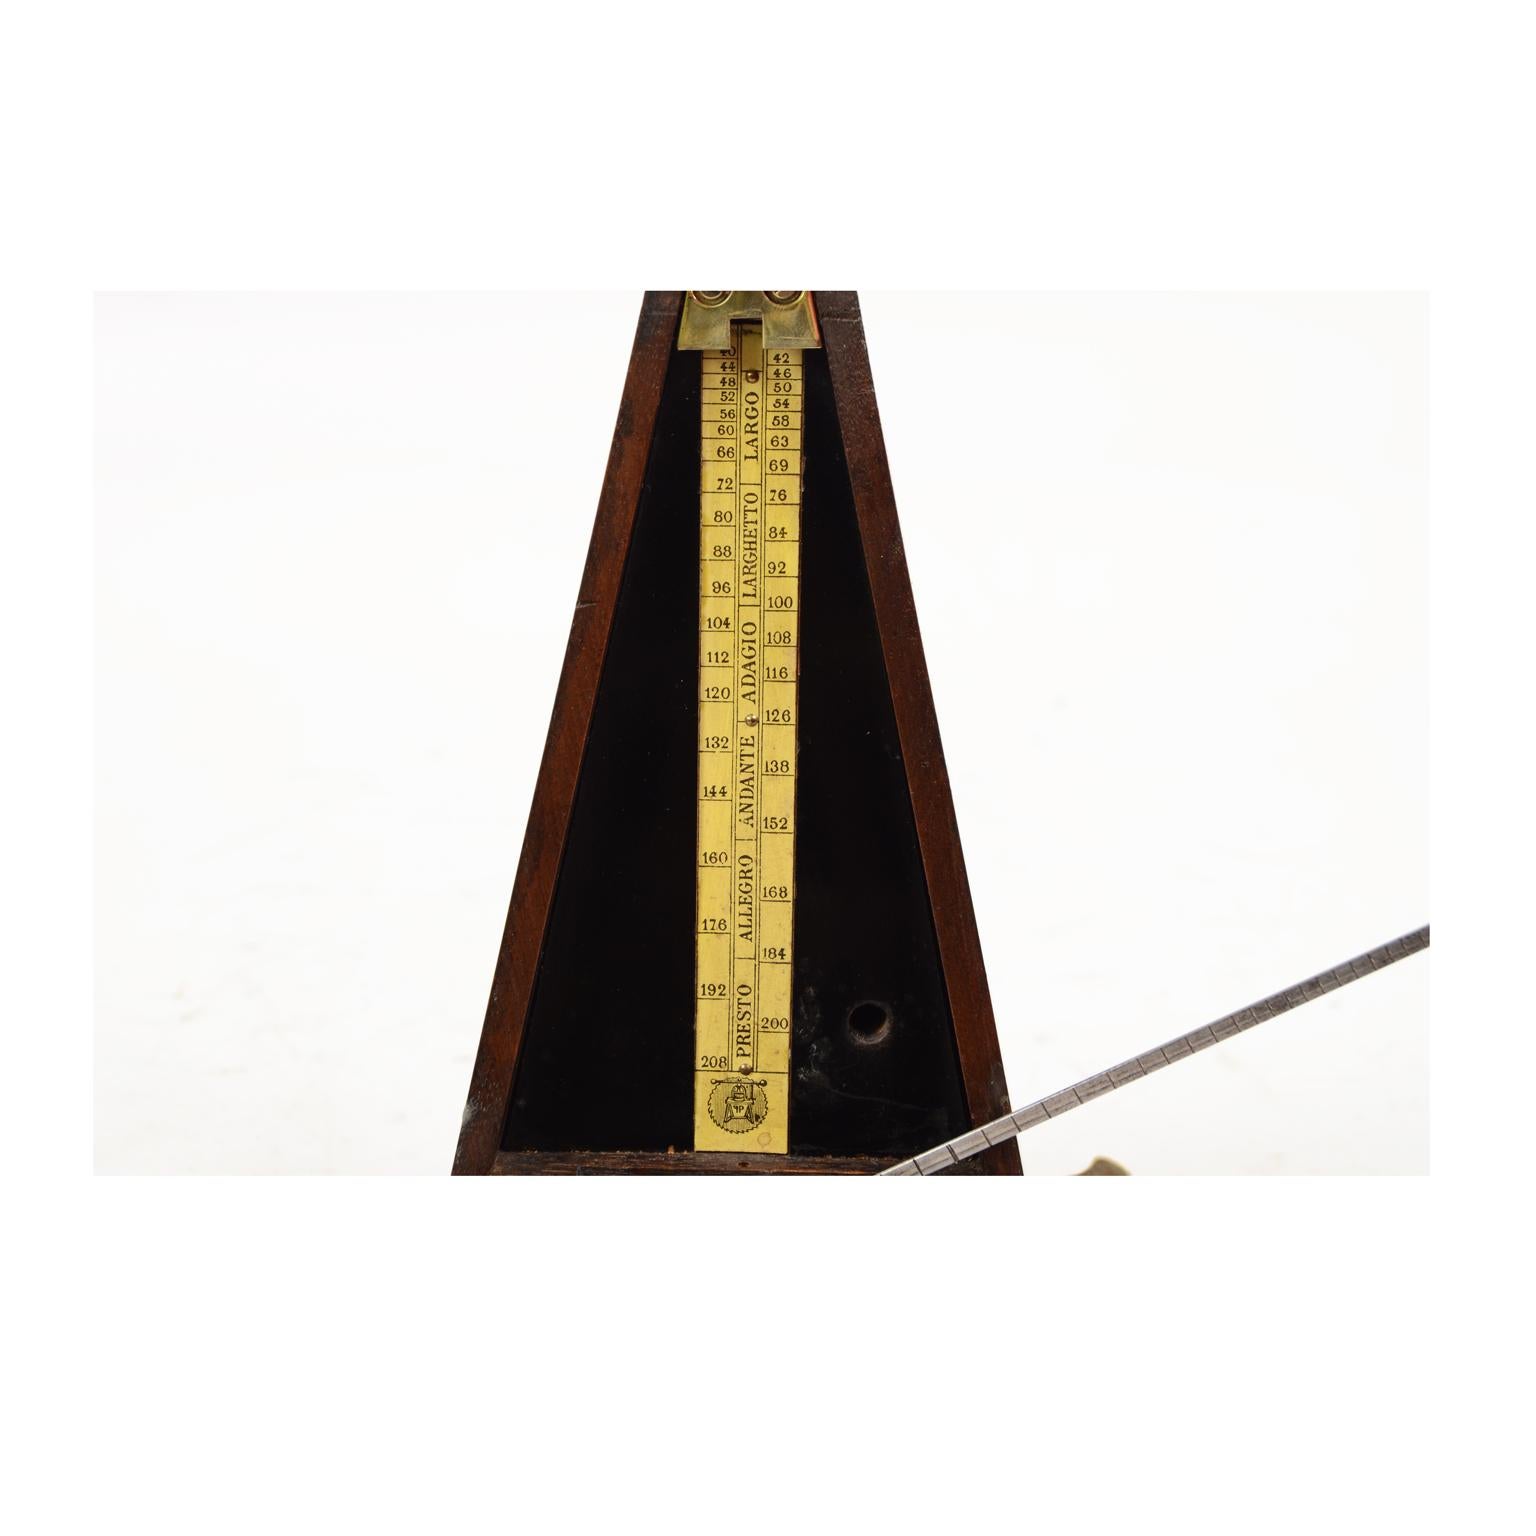 20th Century Metronome Johan Maelzel Antique Musical Measuring Instrument made in Early 1900s